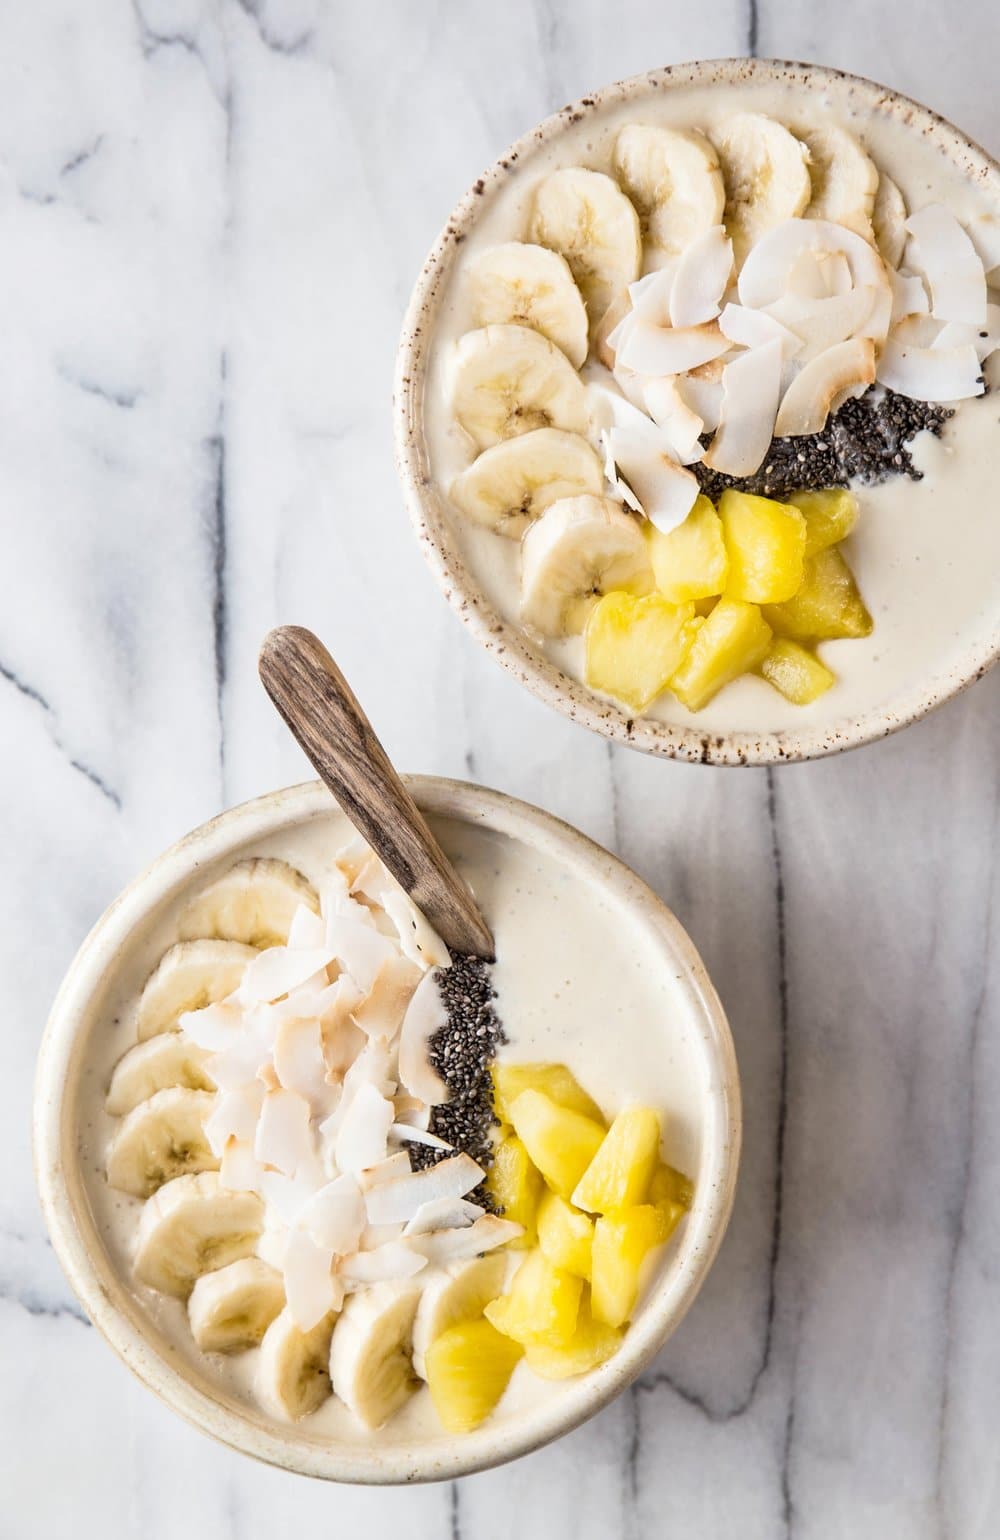 Pineapple Coconut Smoothie Bowl from pastryaffair.com on foodiecrush.com